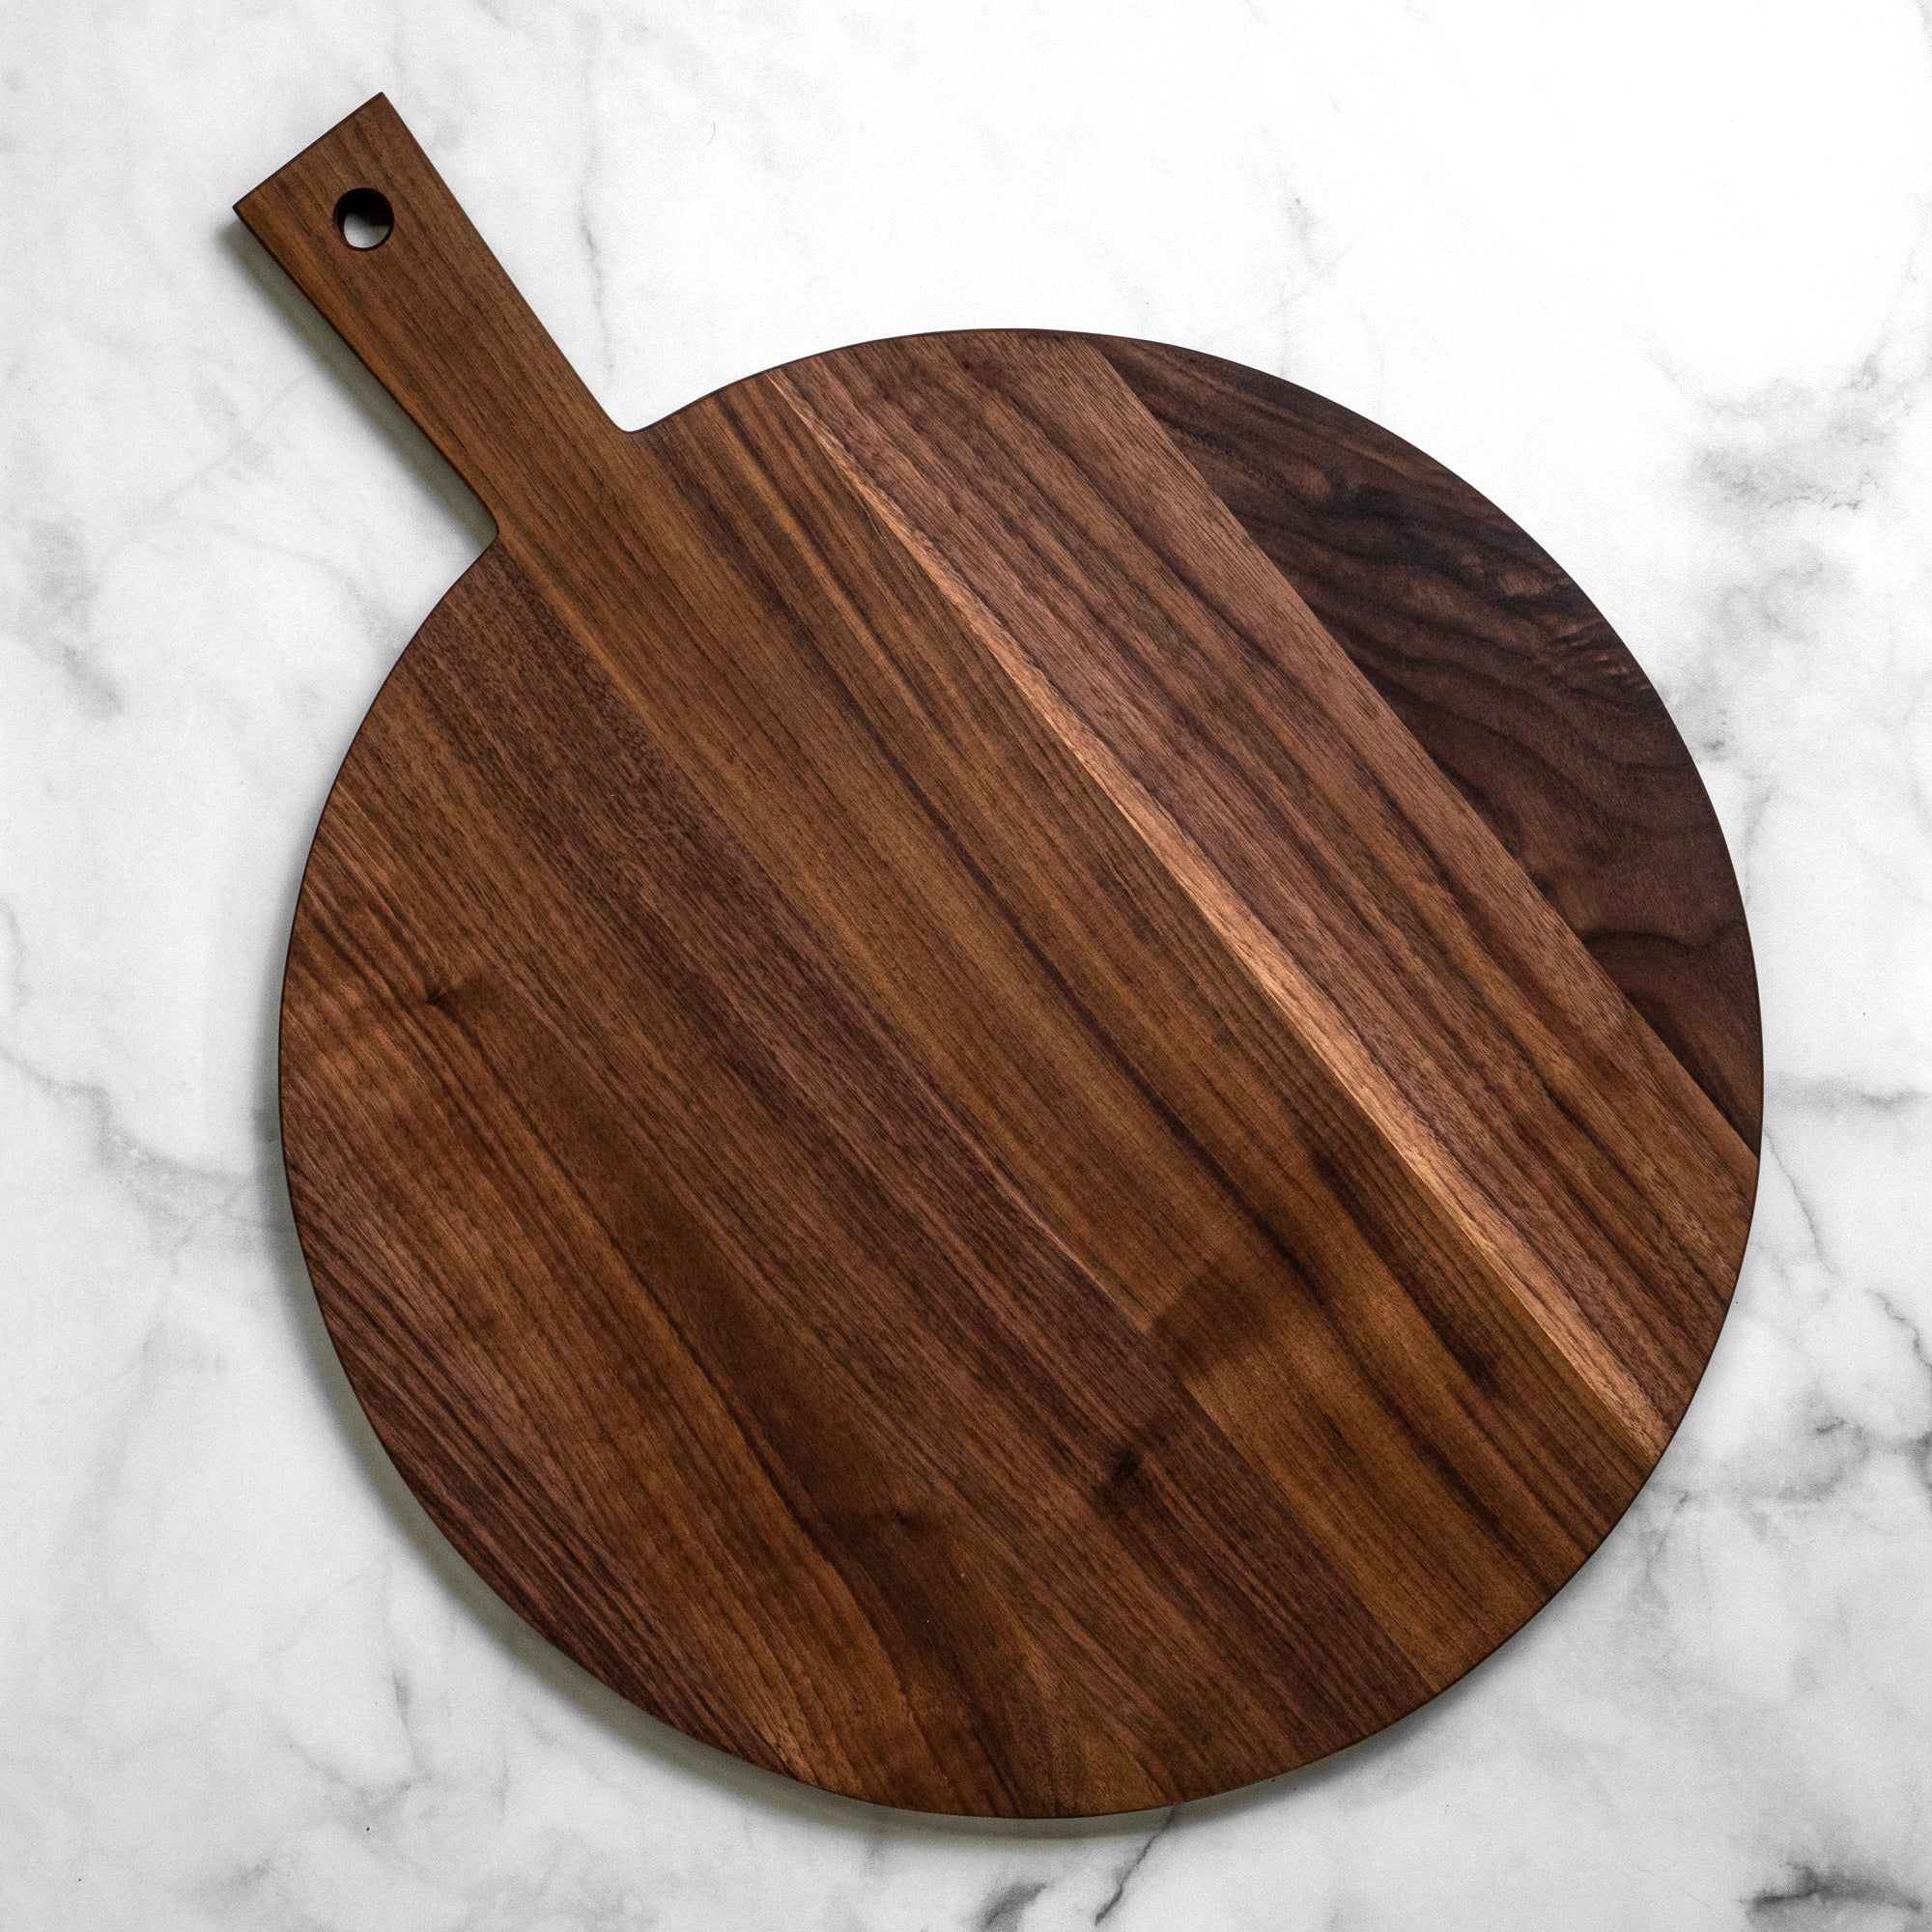 Cutting-Serving Boards with Handle - Peterman's Boards & Bowls